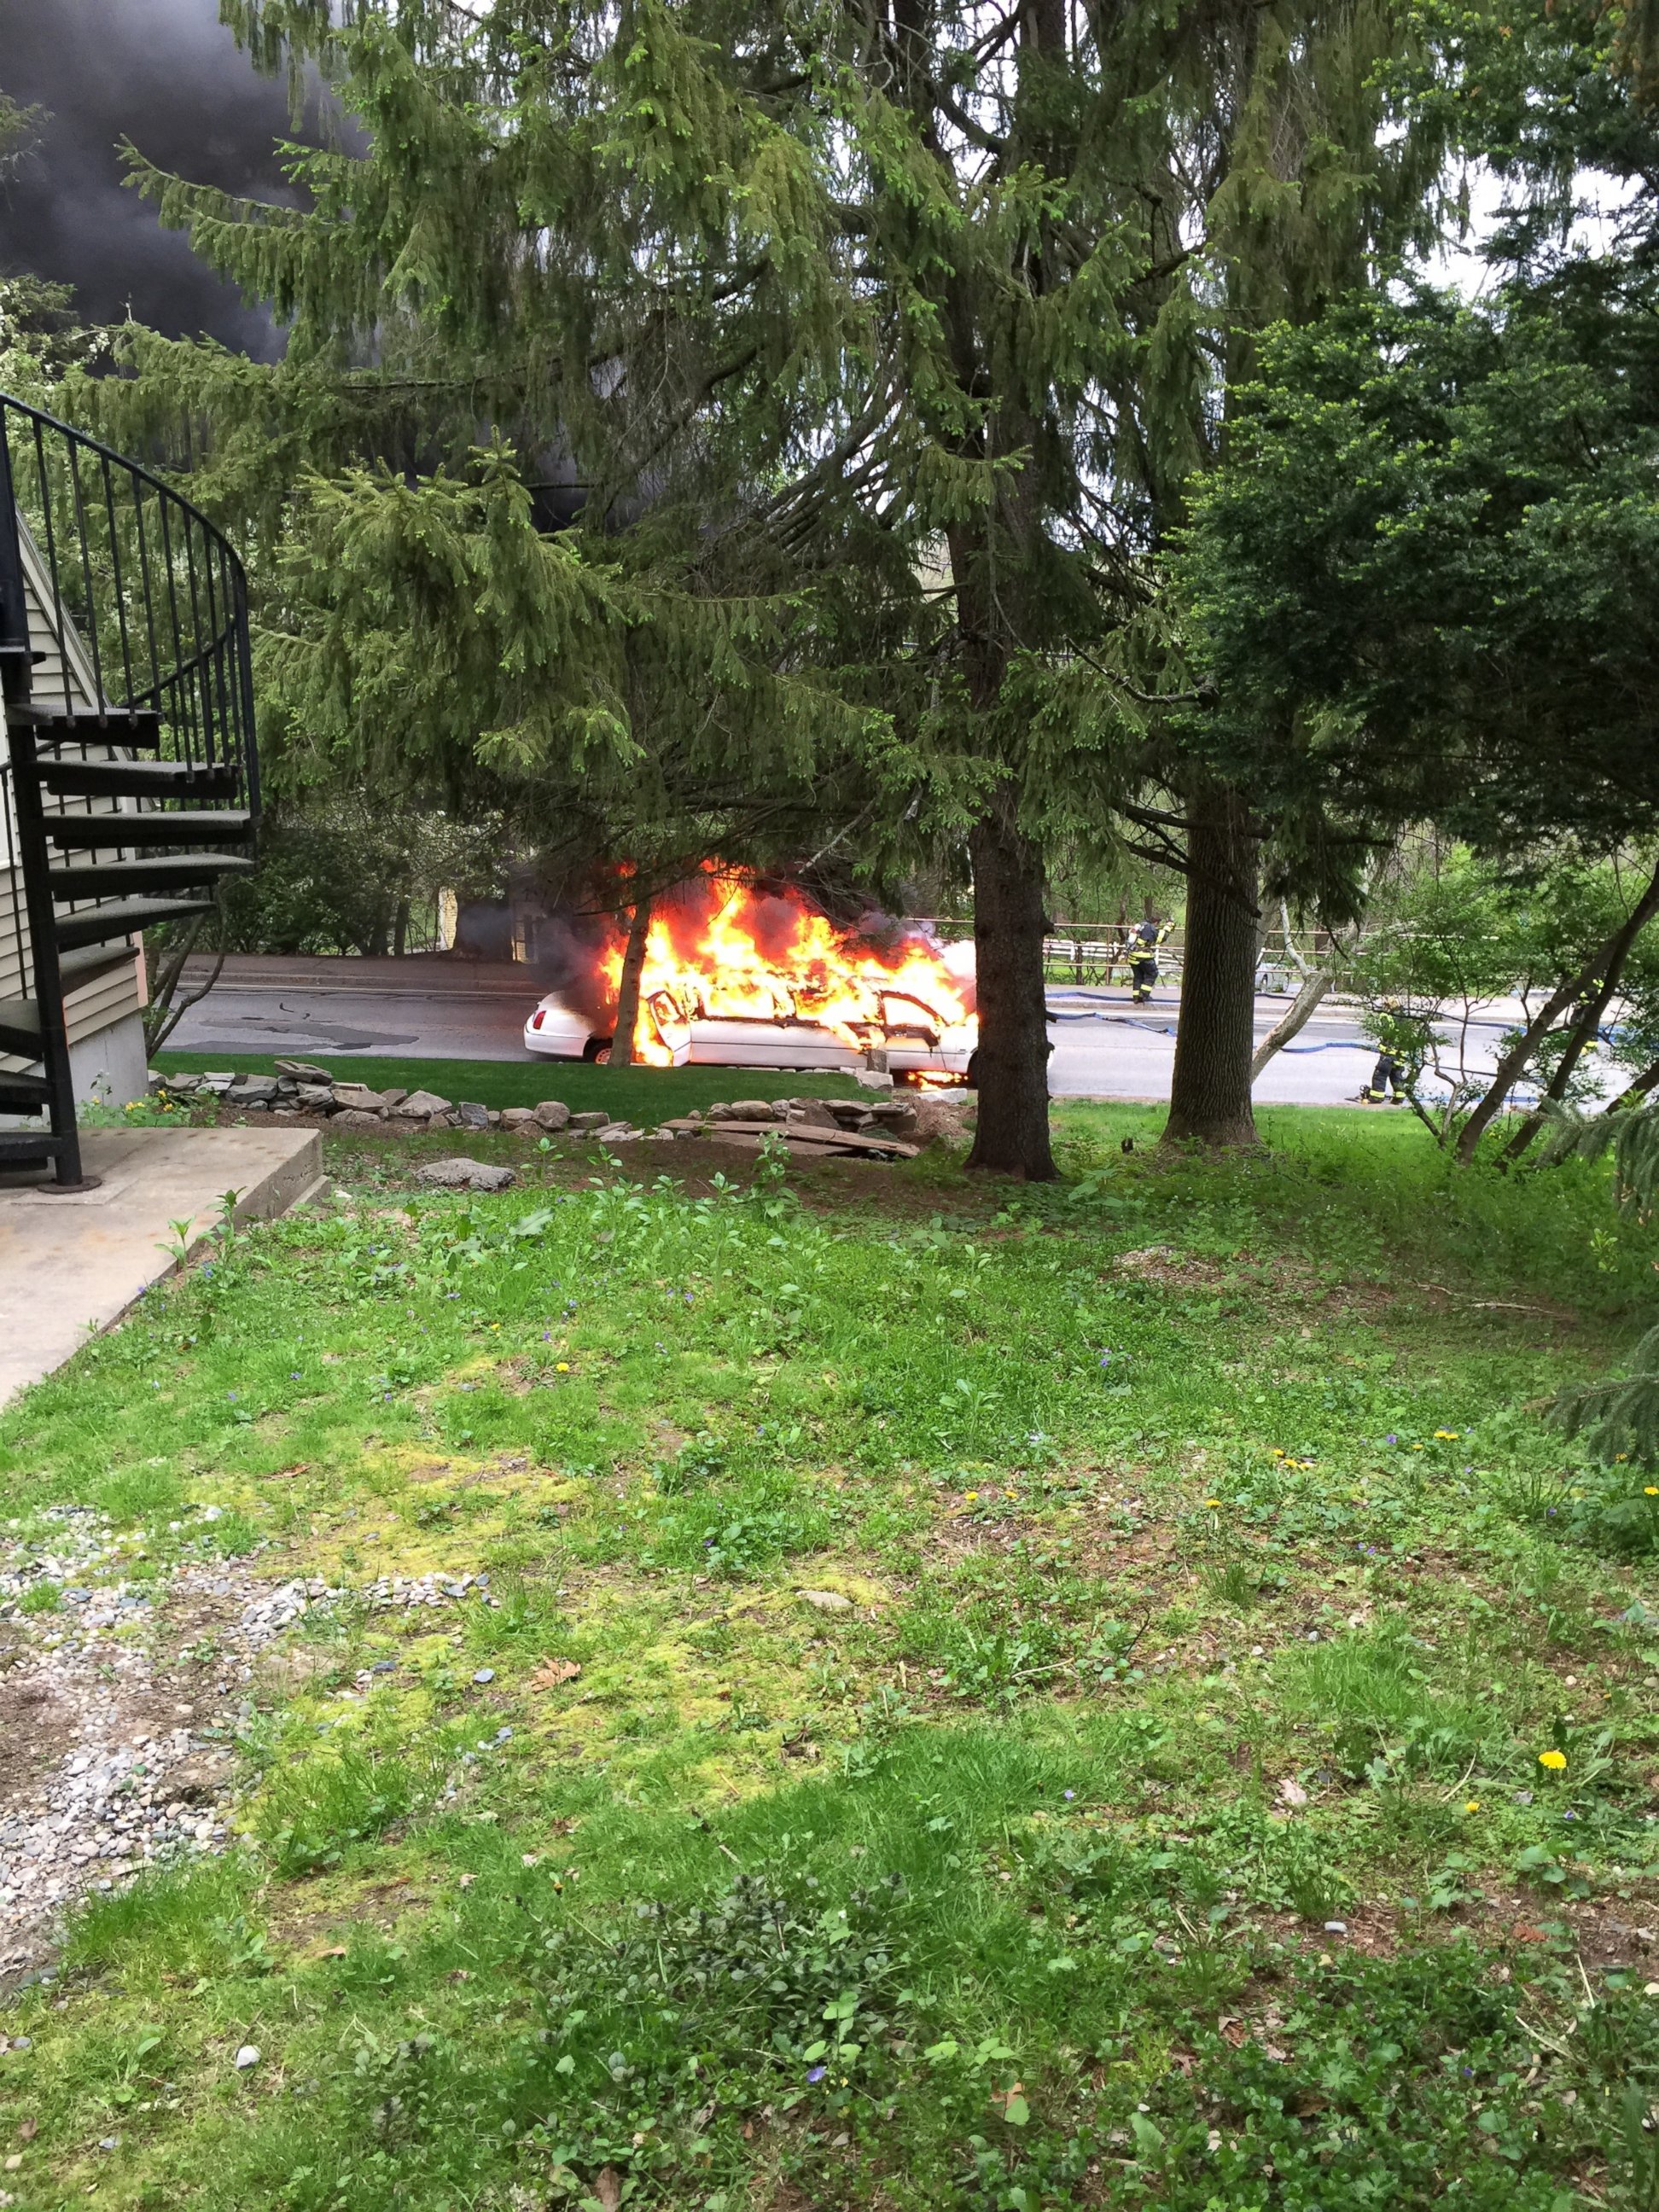 PHOTO: A limo that was occupied with students en route to their high school prom in Natick, Massachusetts, on May 13, 2016, caught on fire. The students emerged unharmed. 